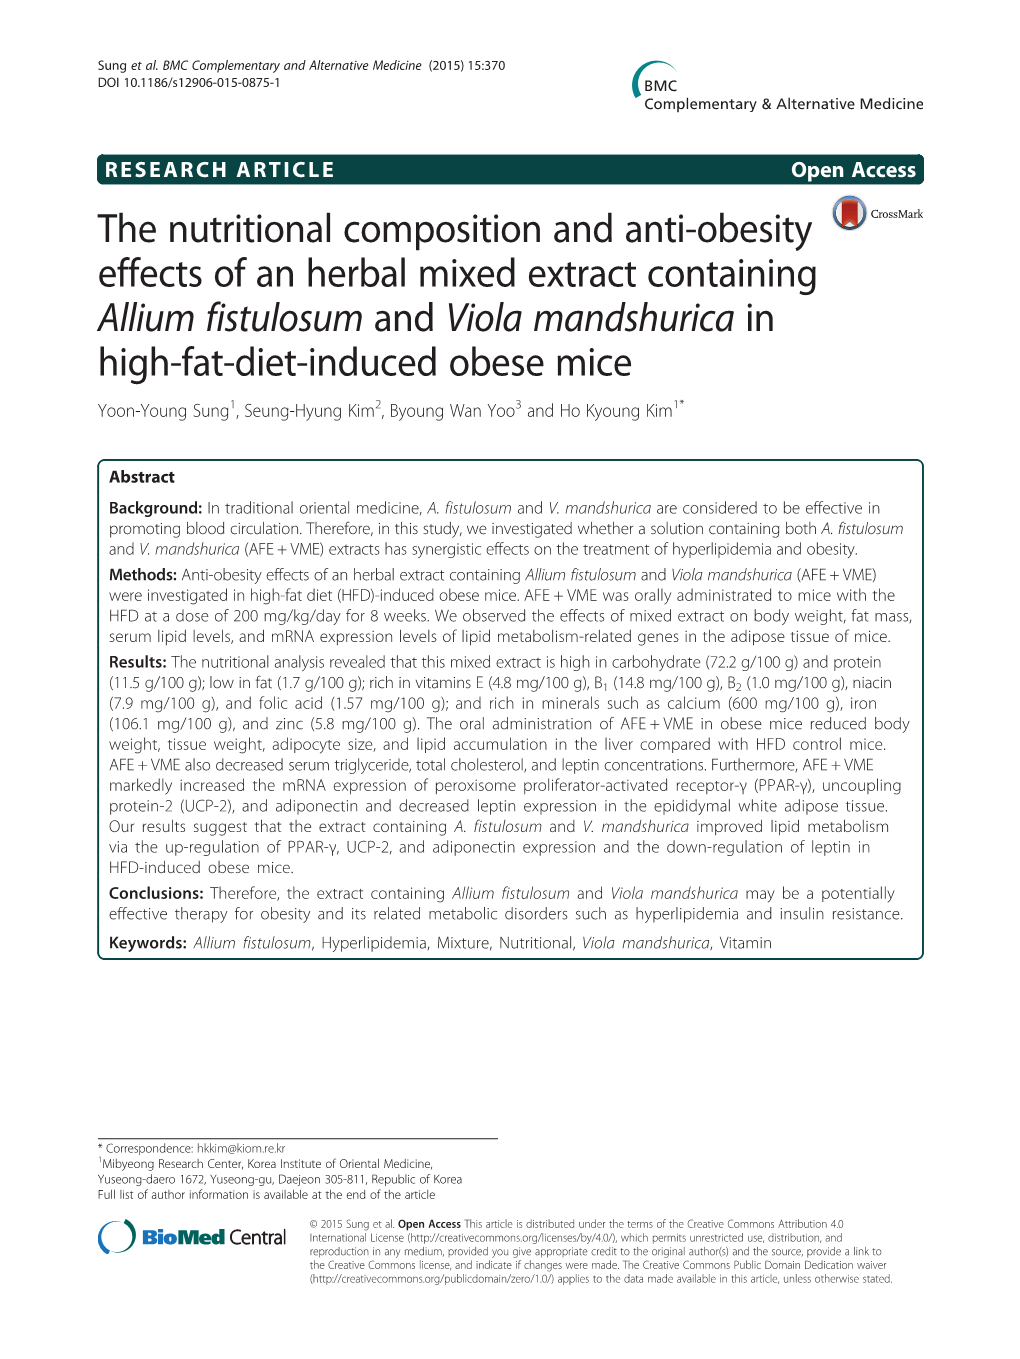 The Nutritional Composition and Anti-Obesity Effects of an Herbal